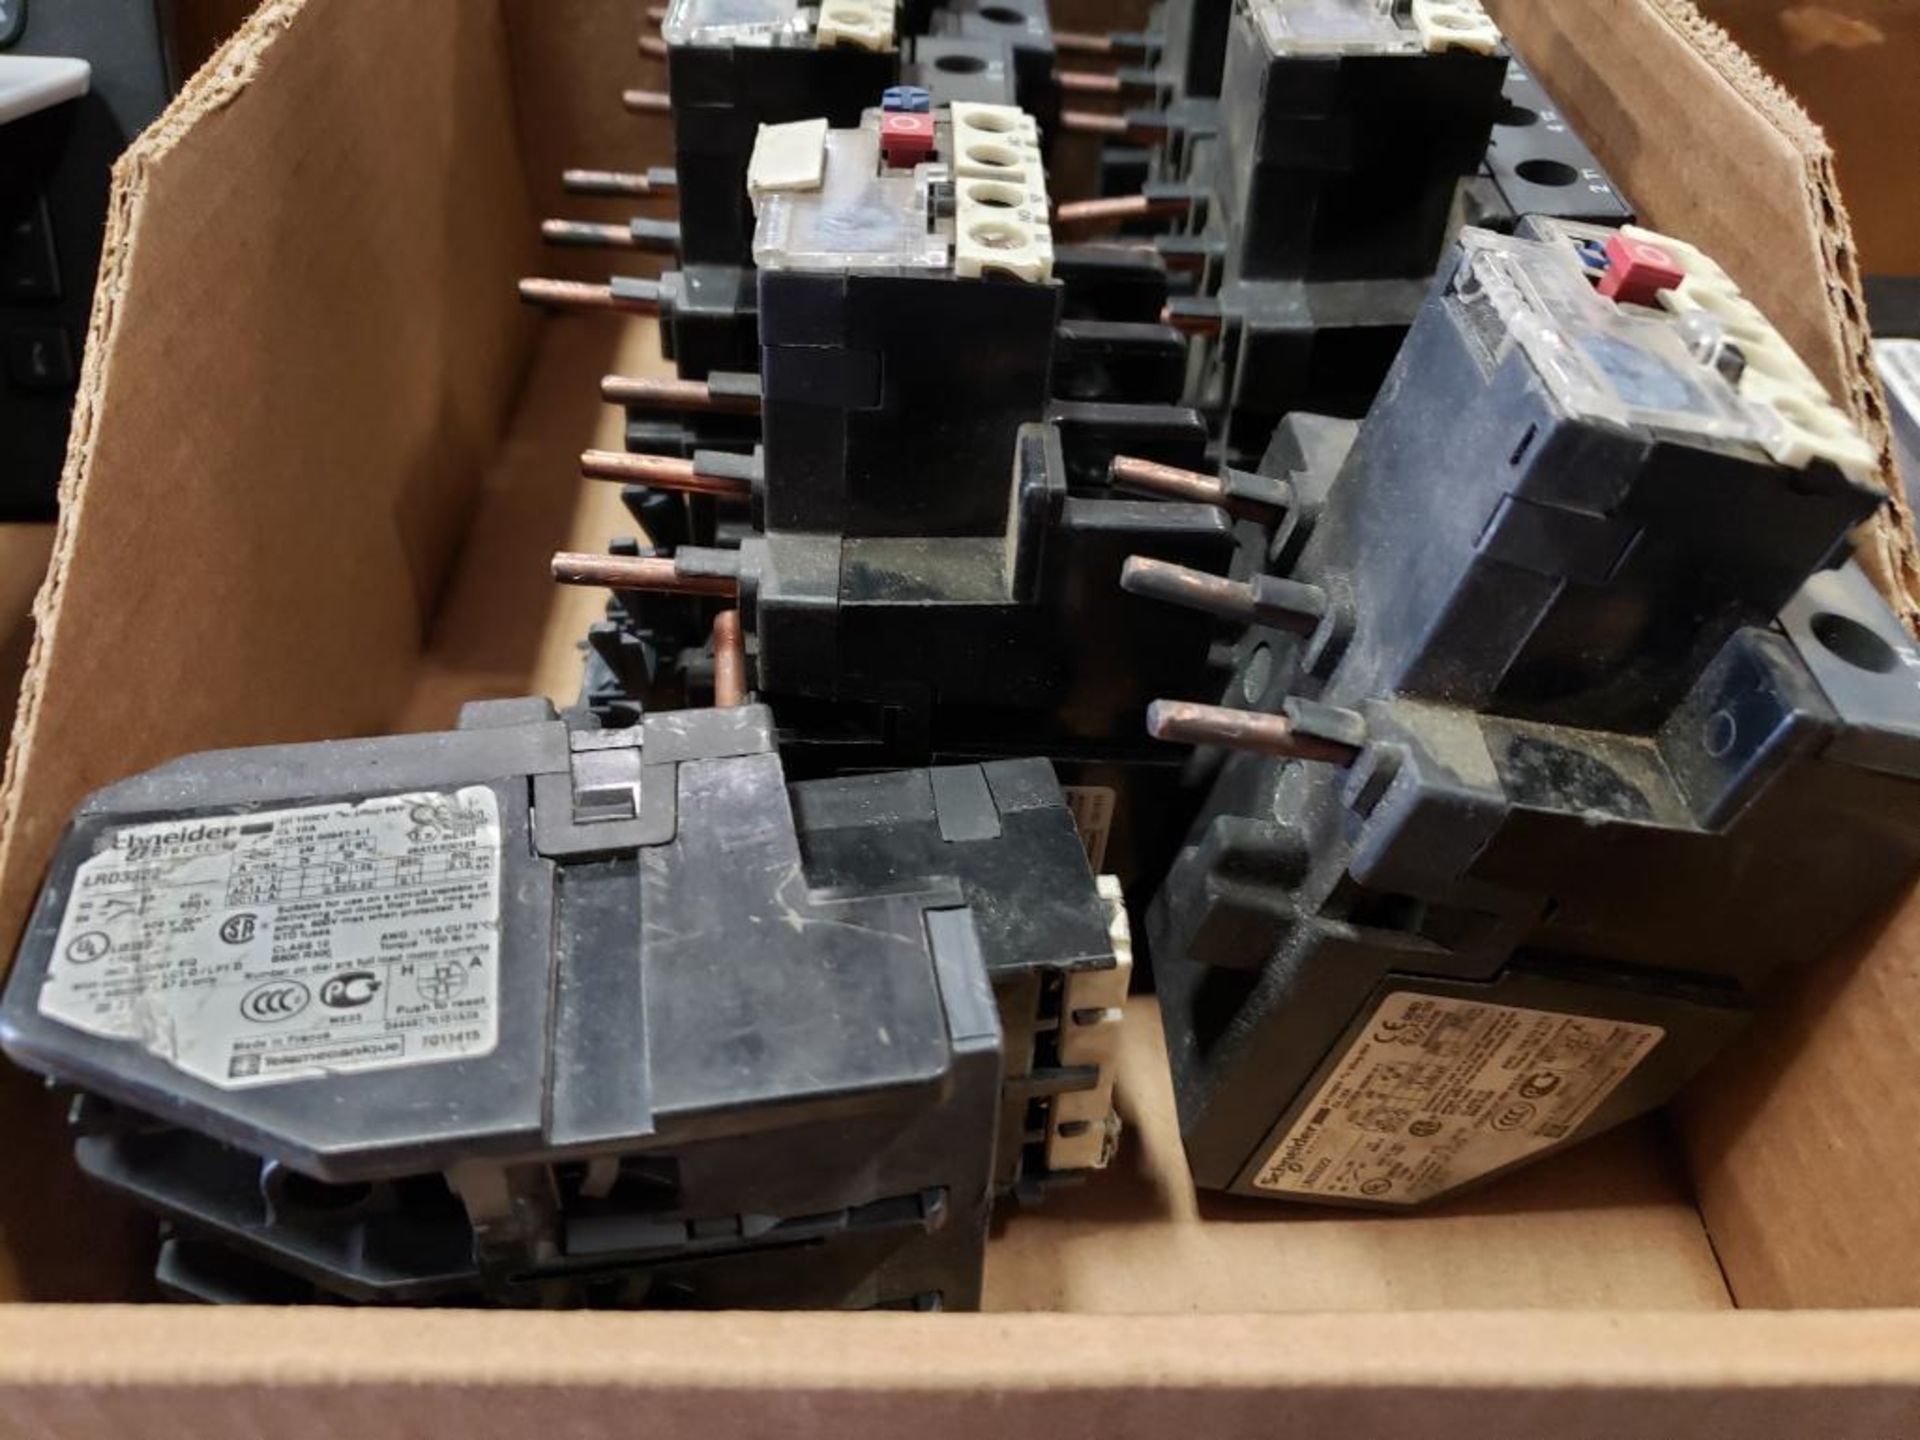 Qty 7 - Schneider Electric LRD3322 contactor relay. - Image 4 of 5